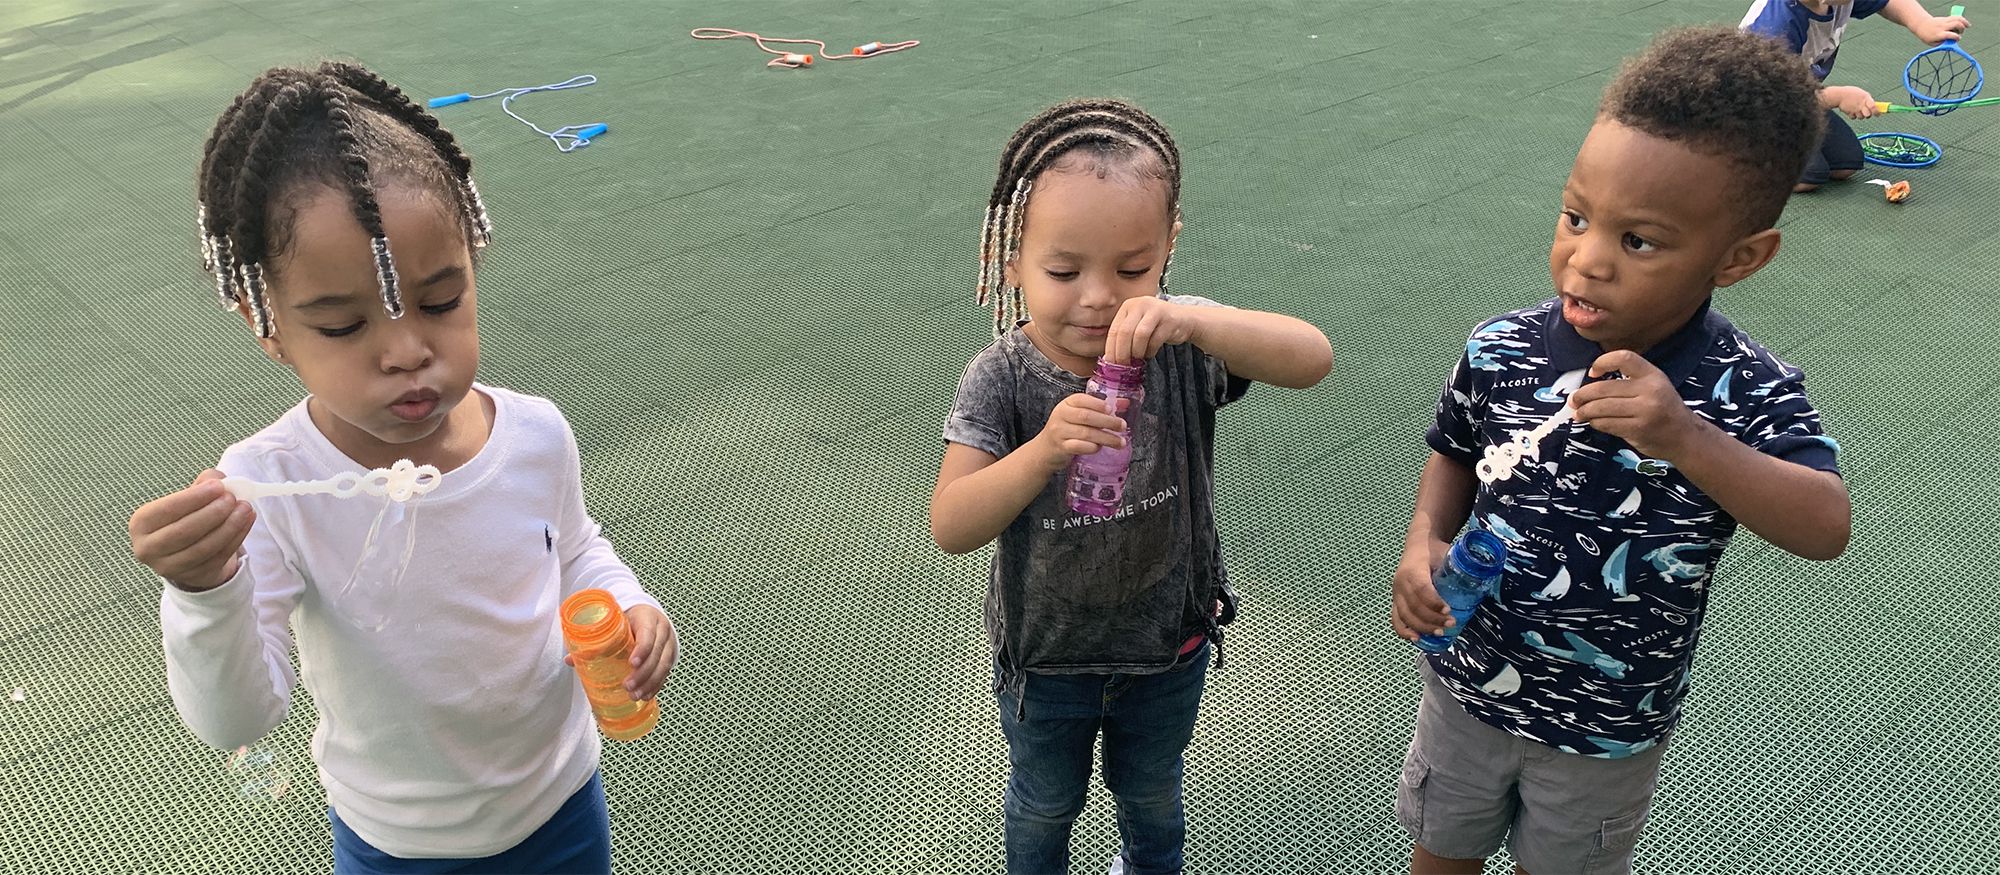 Three Training Wheels students a blowing bubbles.